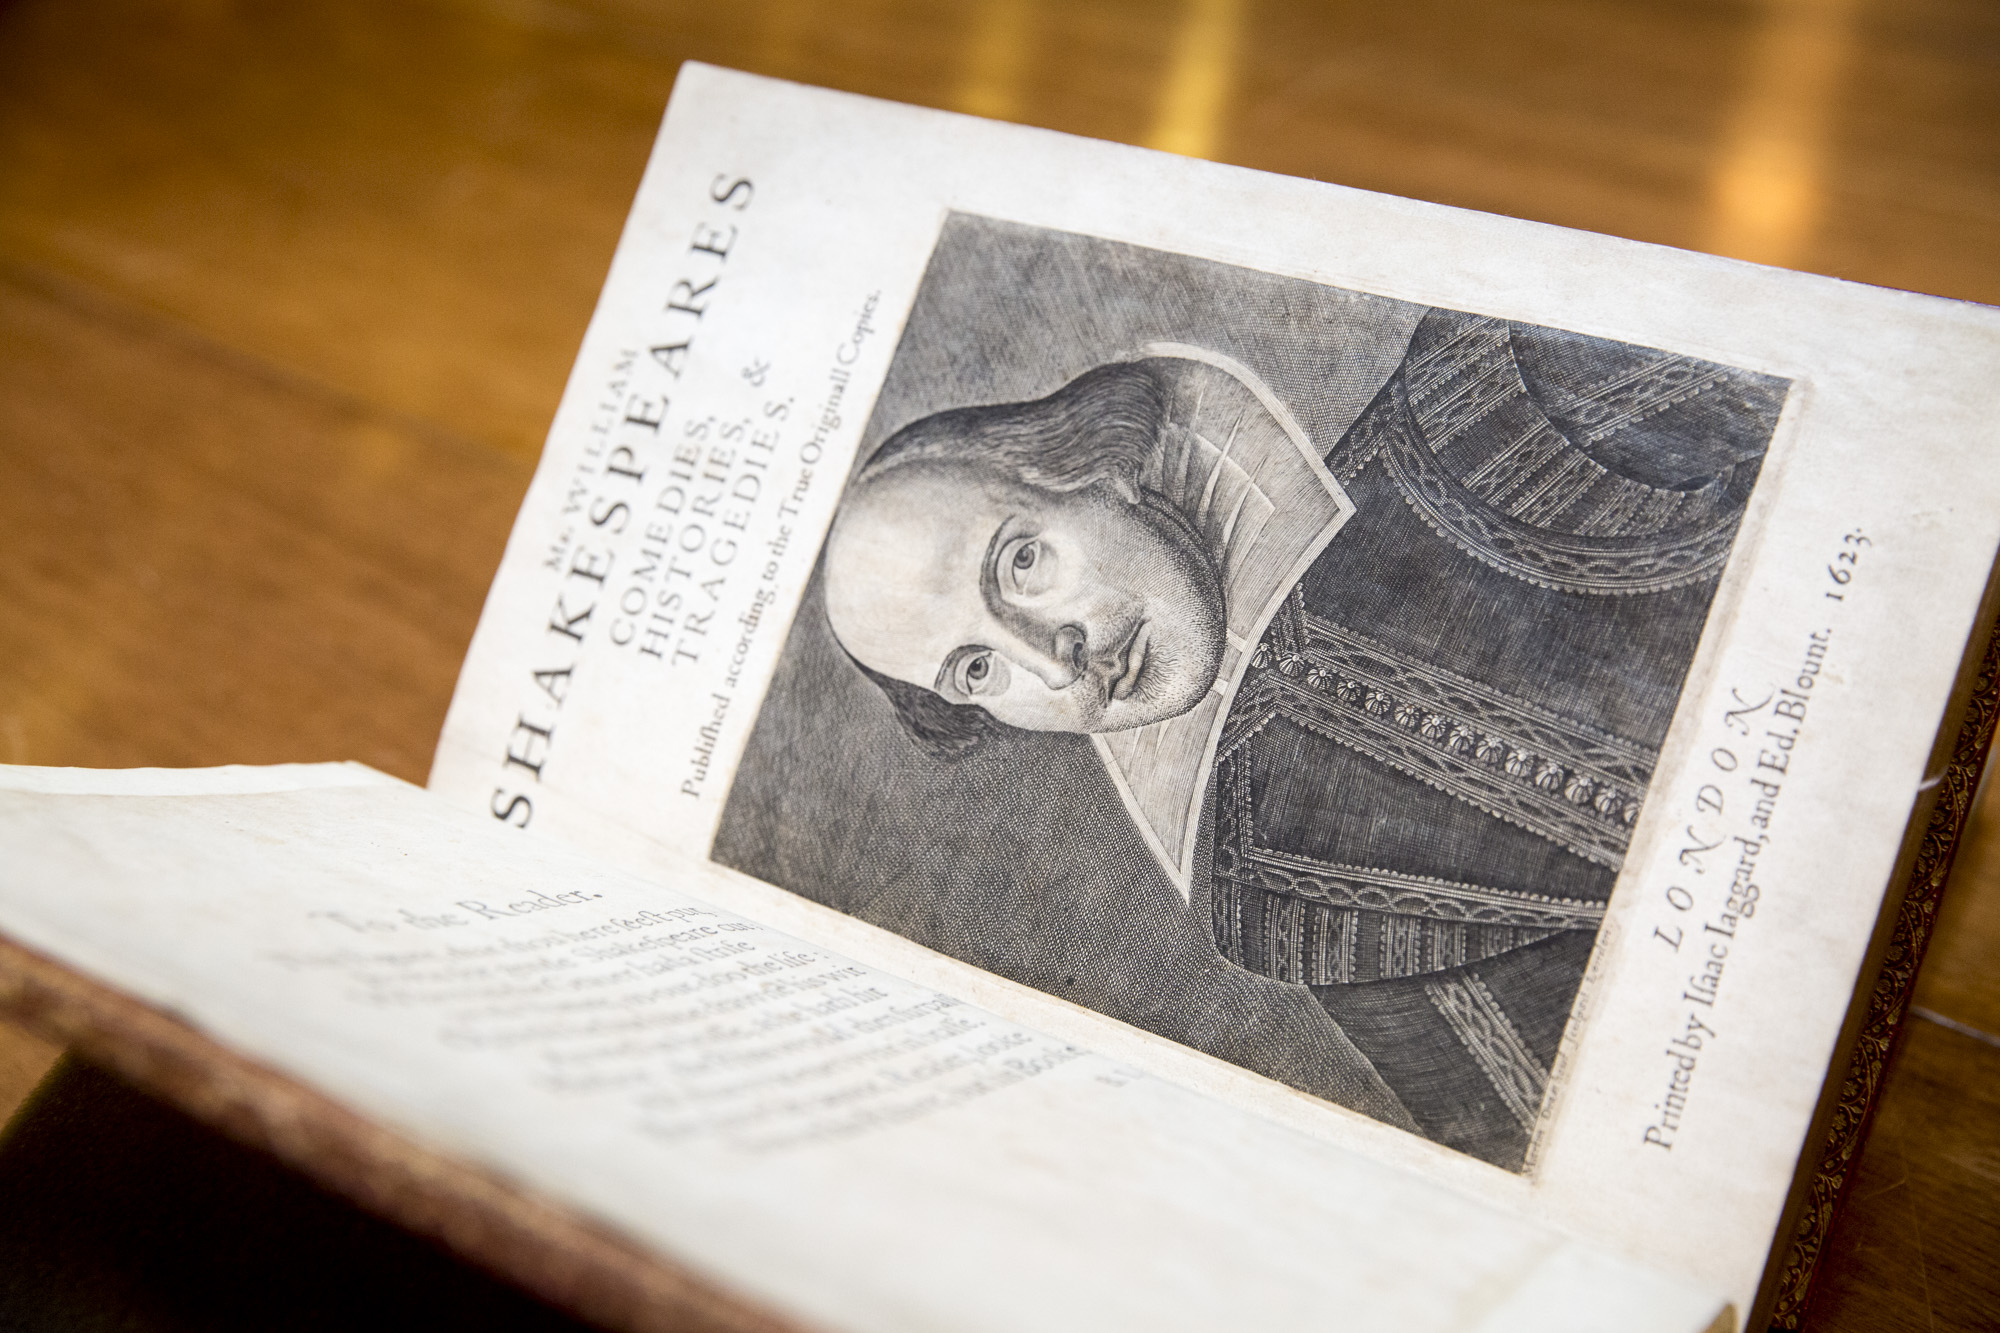 Research by Penn engineers has found that William Shakespeare was not the only author of the three “Henry VI” plays, which were most likely a collaboration with Christopher Marlowe.